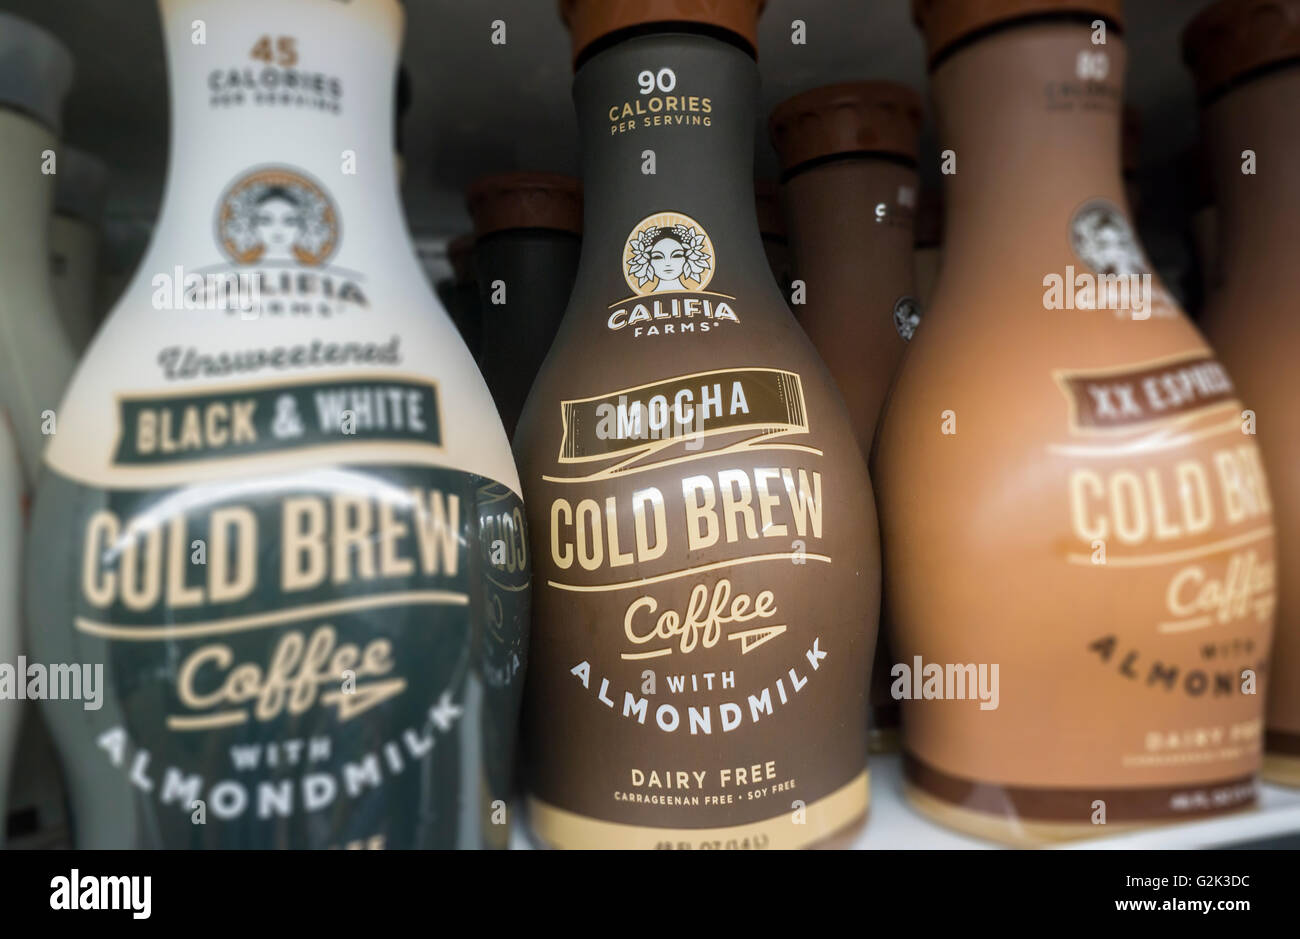 Bottles of Califia Farms brand ready-to-drink coffee with almond milk in a supermarket in New York on Wednesday, May 25, 2016. Coffee makers are throwing their weight into canned and bottled coffee, both cold brew and traditional in hopes that consumers will pick up on the fad. Ready-to-drink coffee sales in the U.S. have grown in the double digits in the last five years. Nut milks have also grown in popularity in the last few years. (© Richard B. Levine) Stock Photo